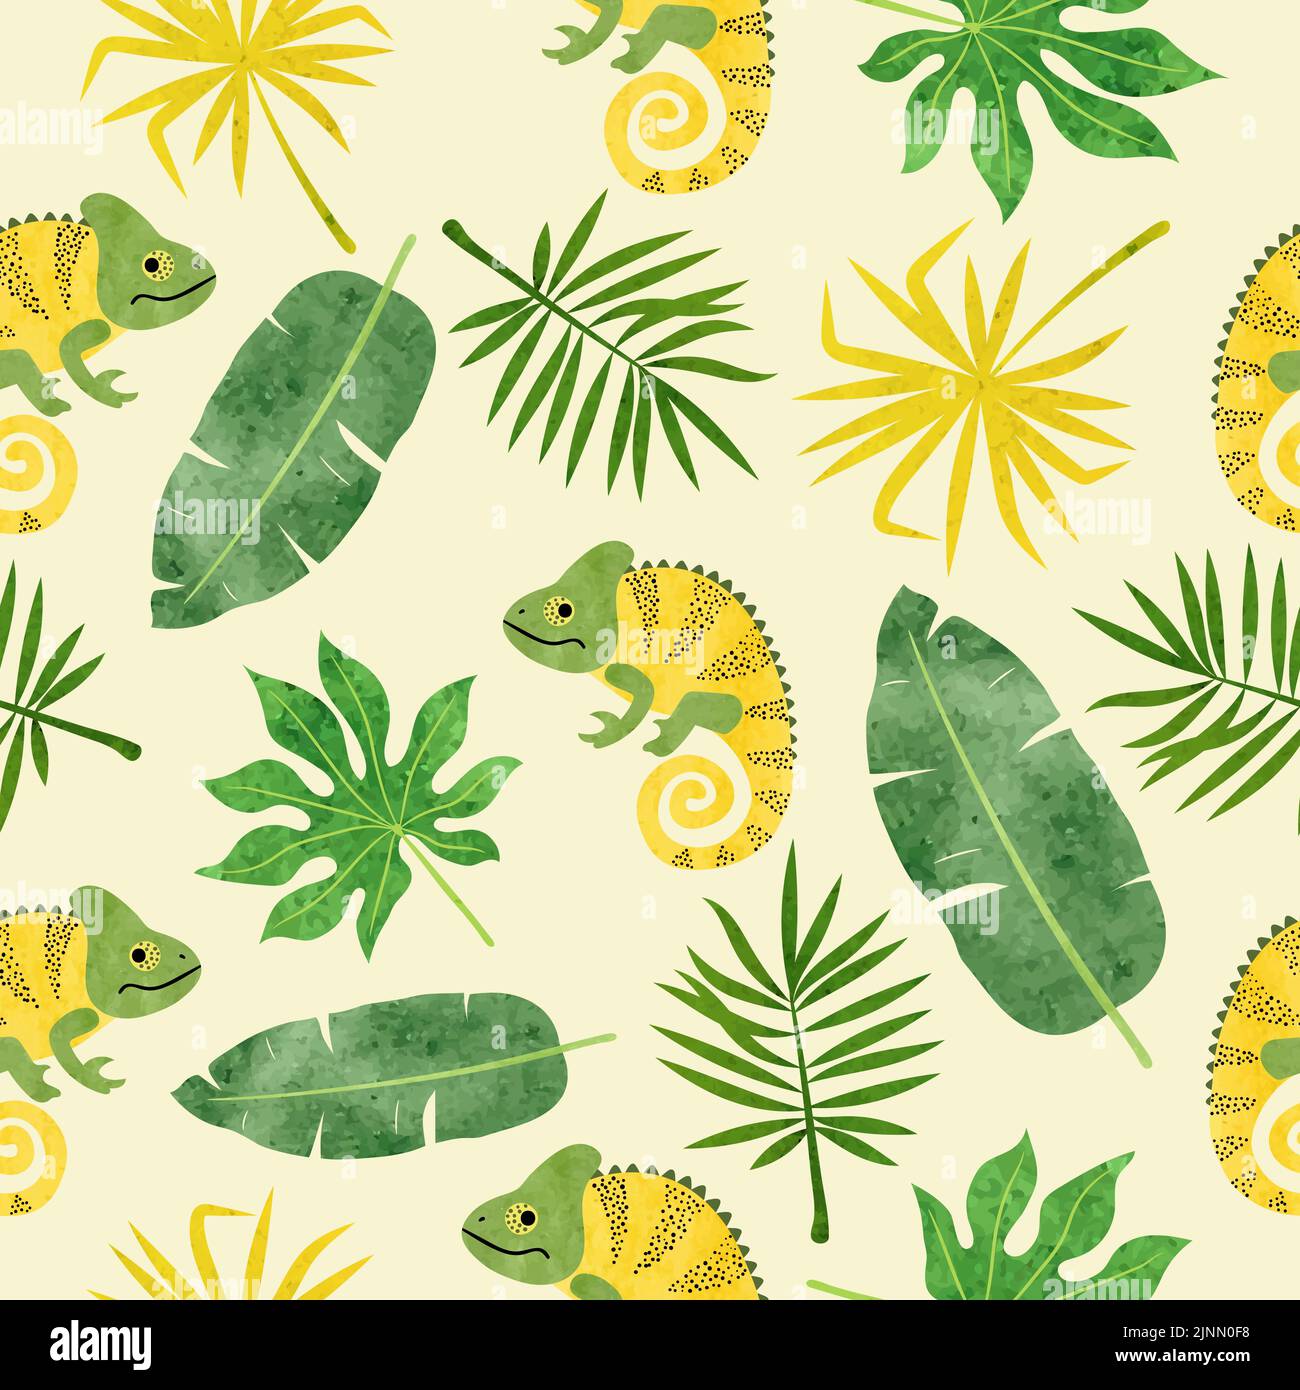 Seamless watercolor pattern with chameleons and tropical leaves. Stock Vector